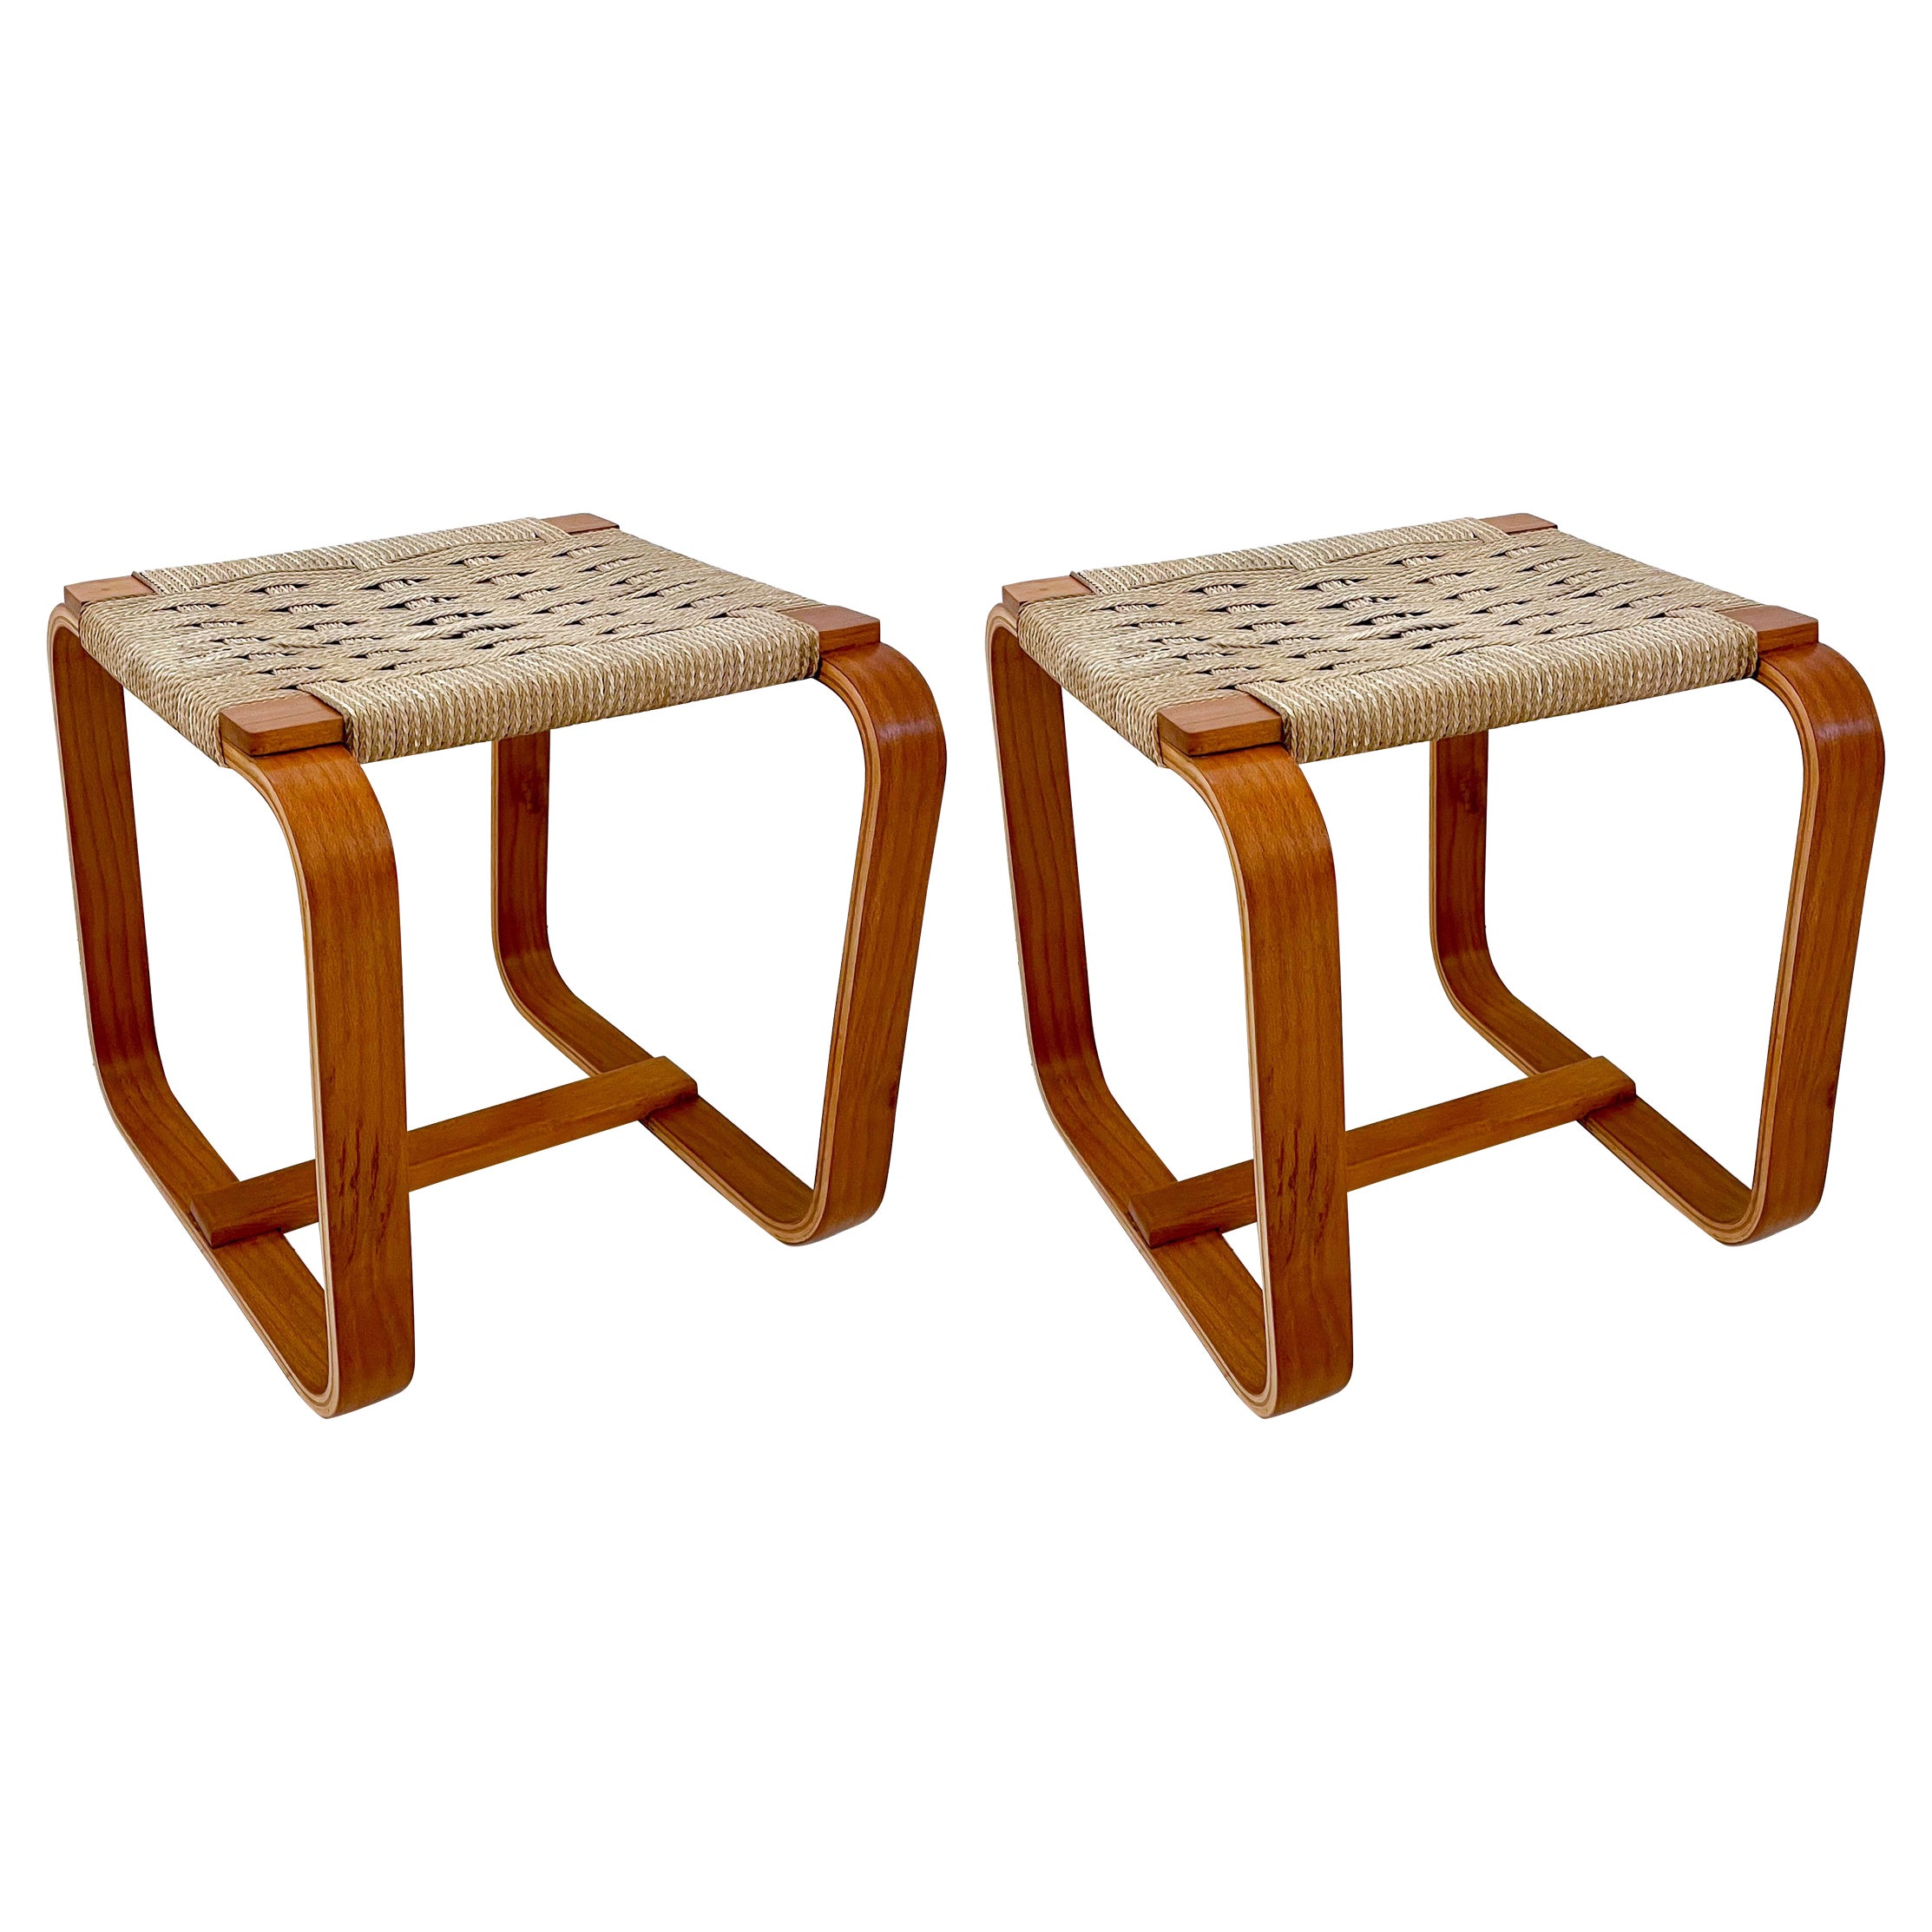 Pair of Bentwood Stools by Giuseppe Pagano Pogatschnig 1938/41, Maggioni, Italy